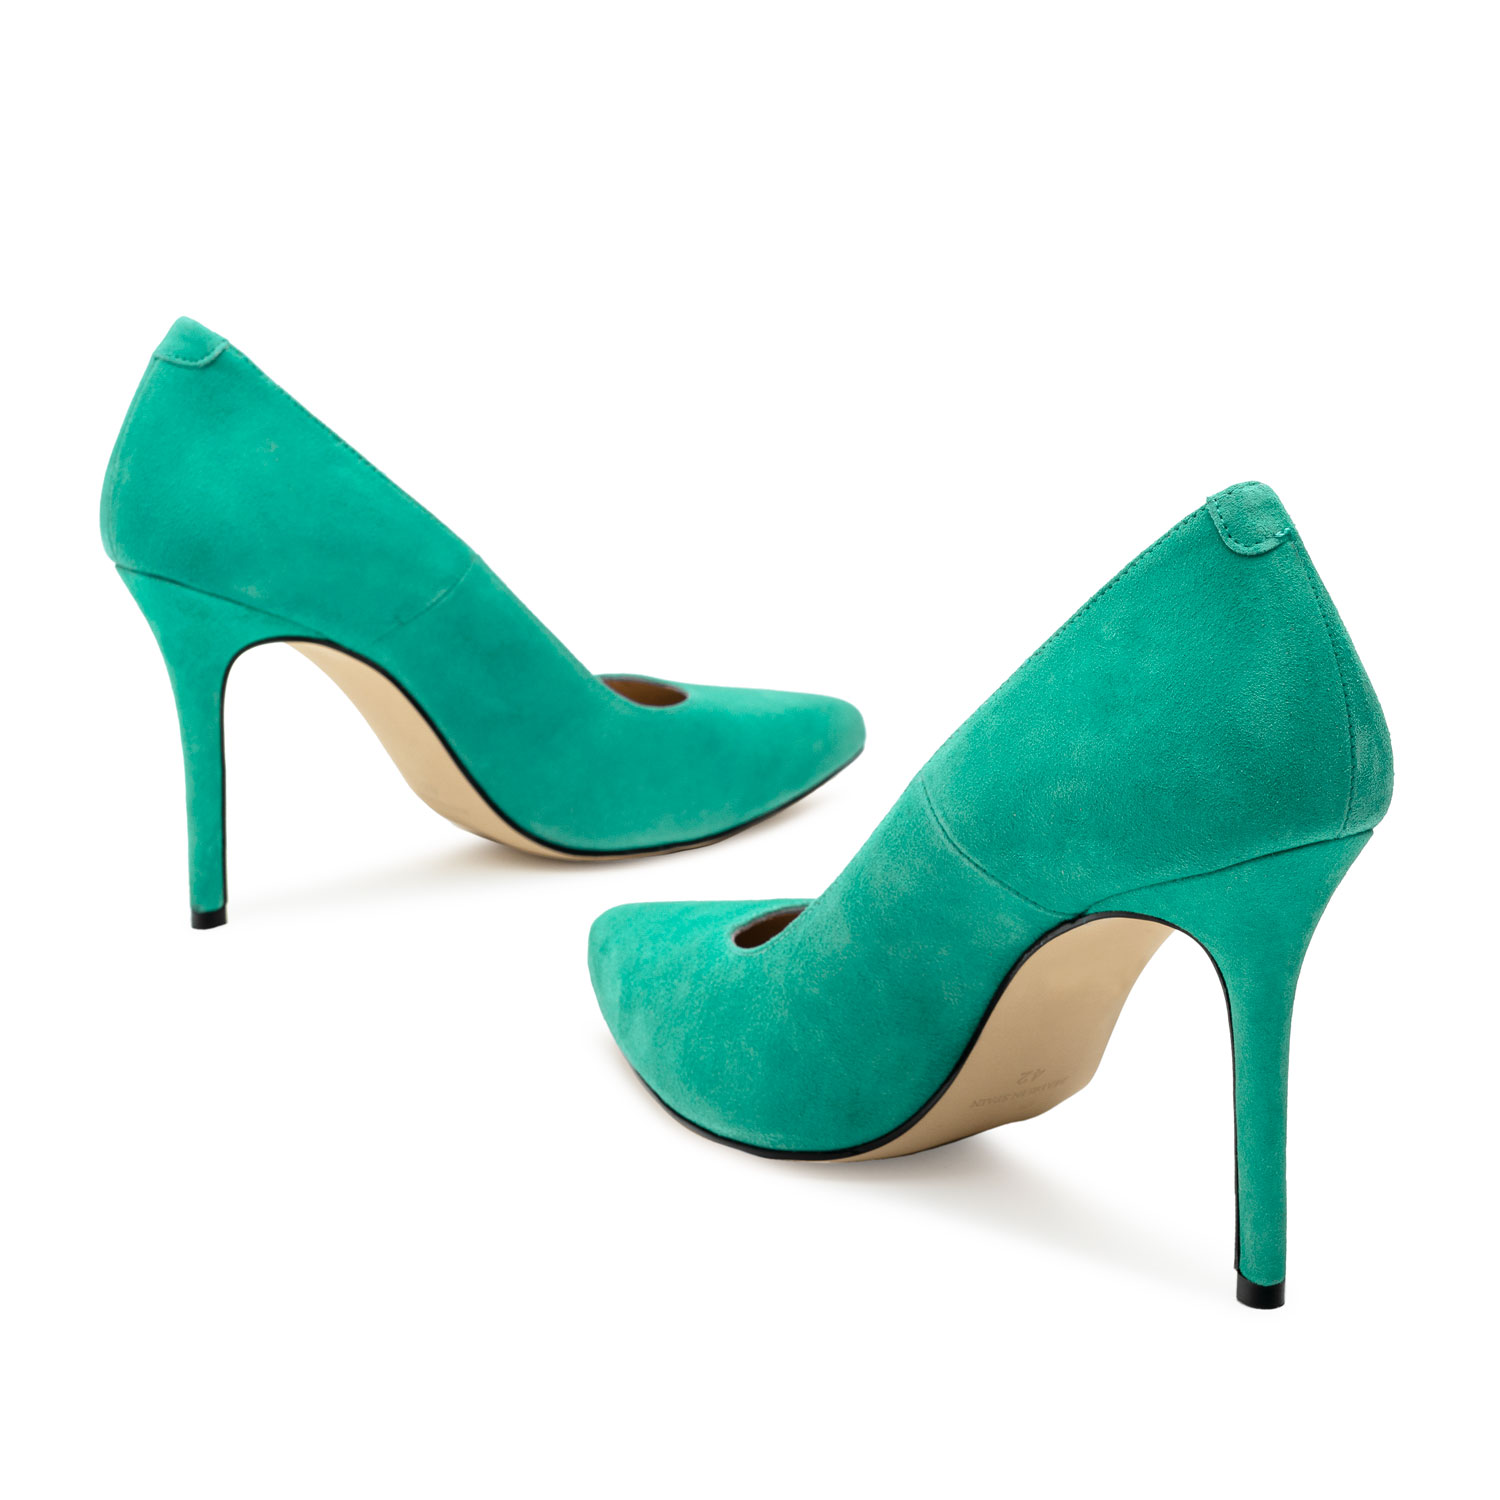 Heeled Shoes in Turquoise Suede 